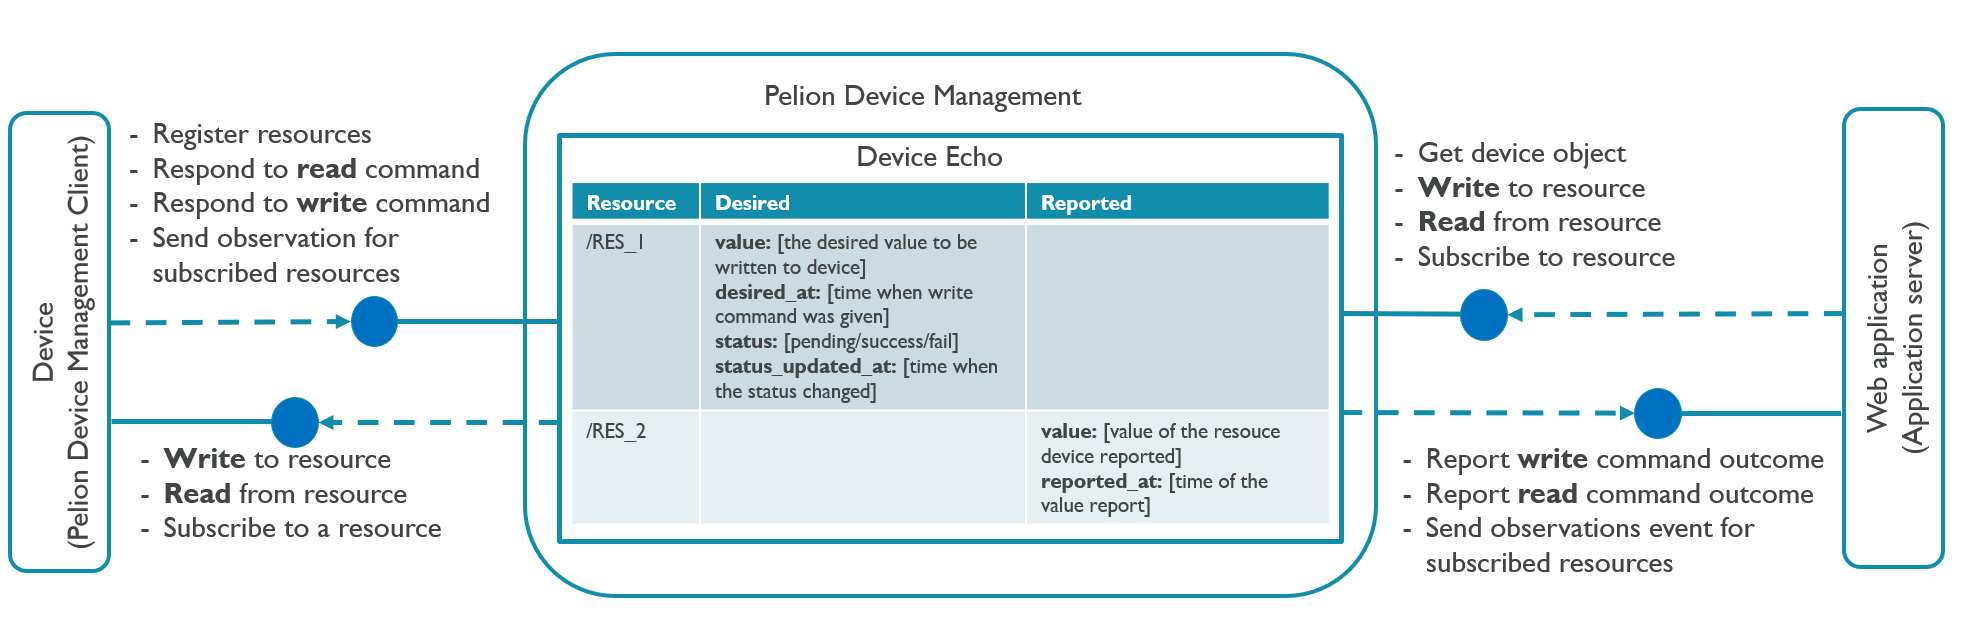 Device Echo overview